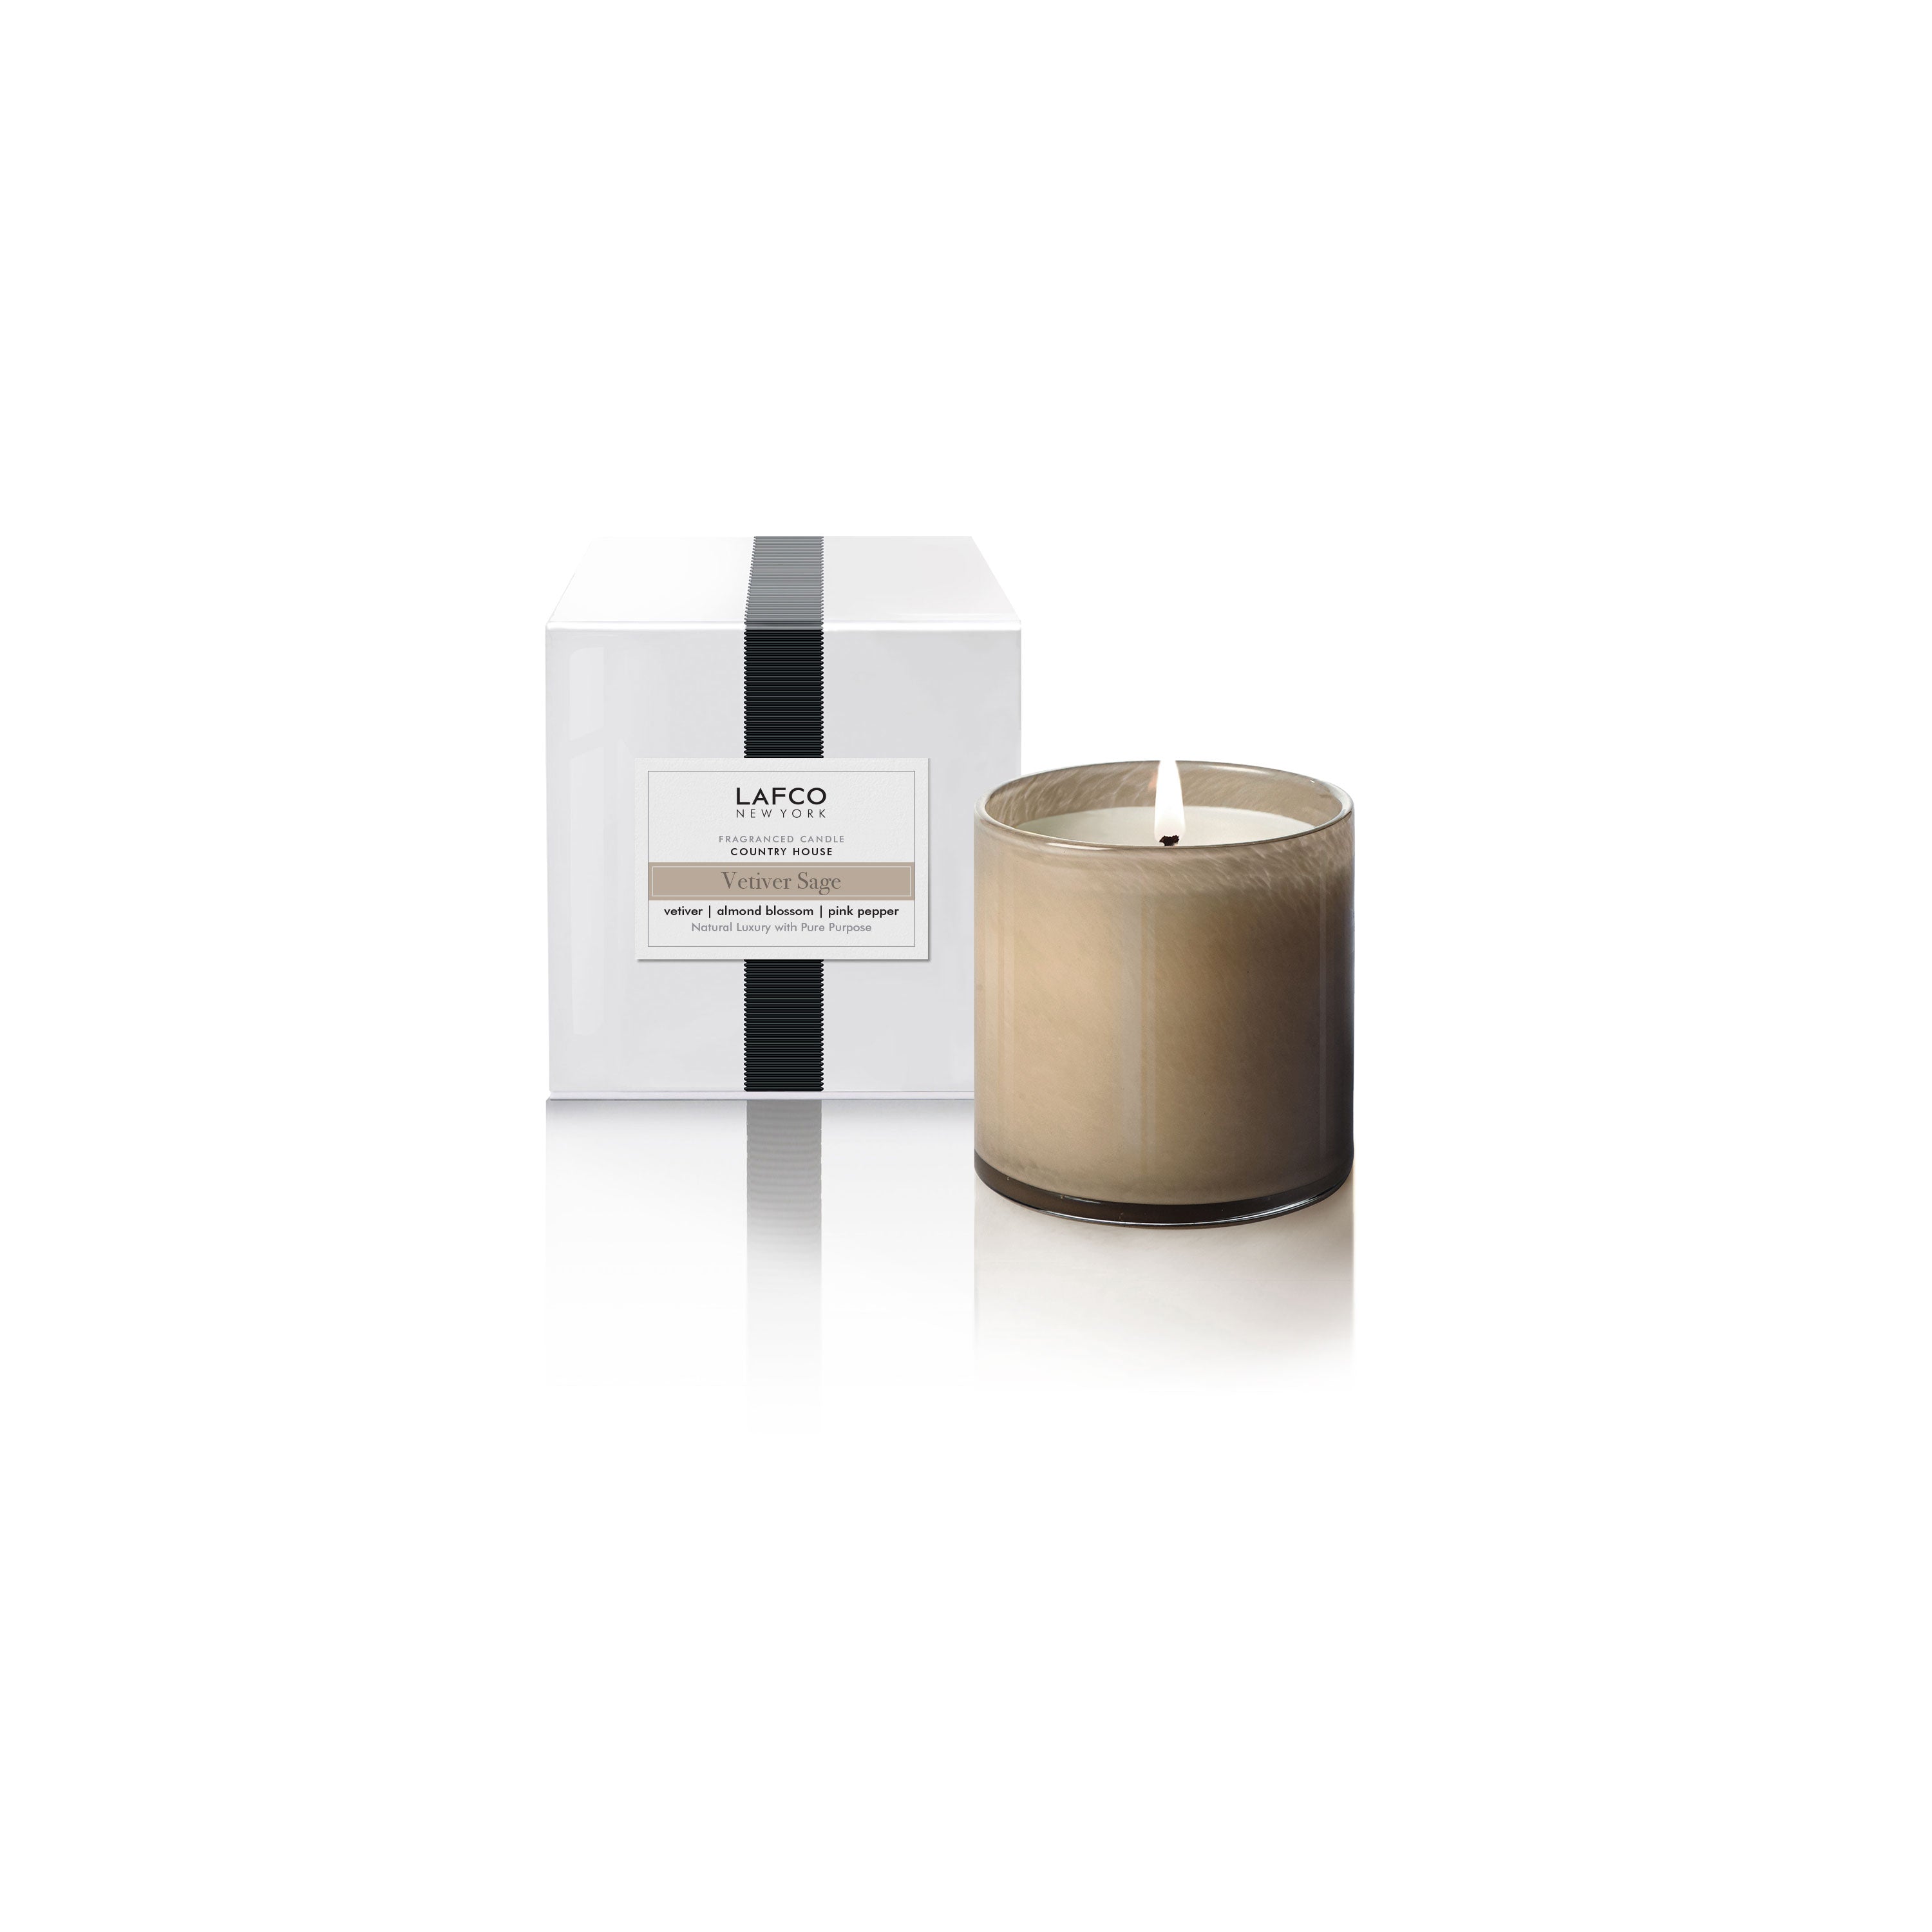 Classic Boxed Single Wick Scented Candle